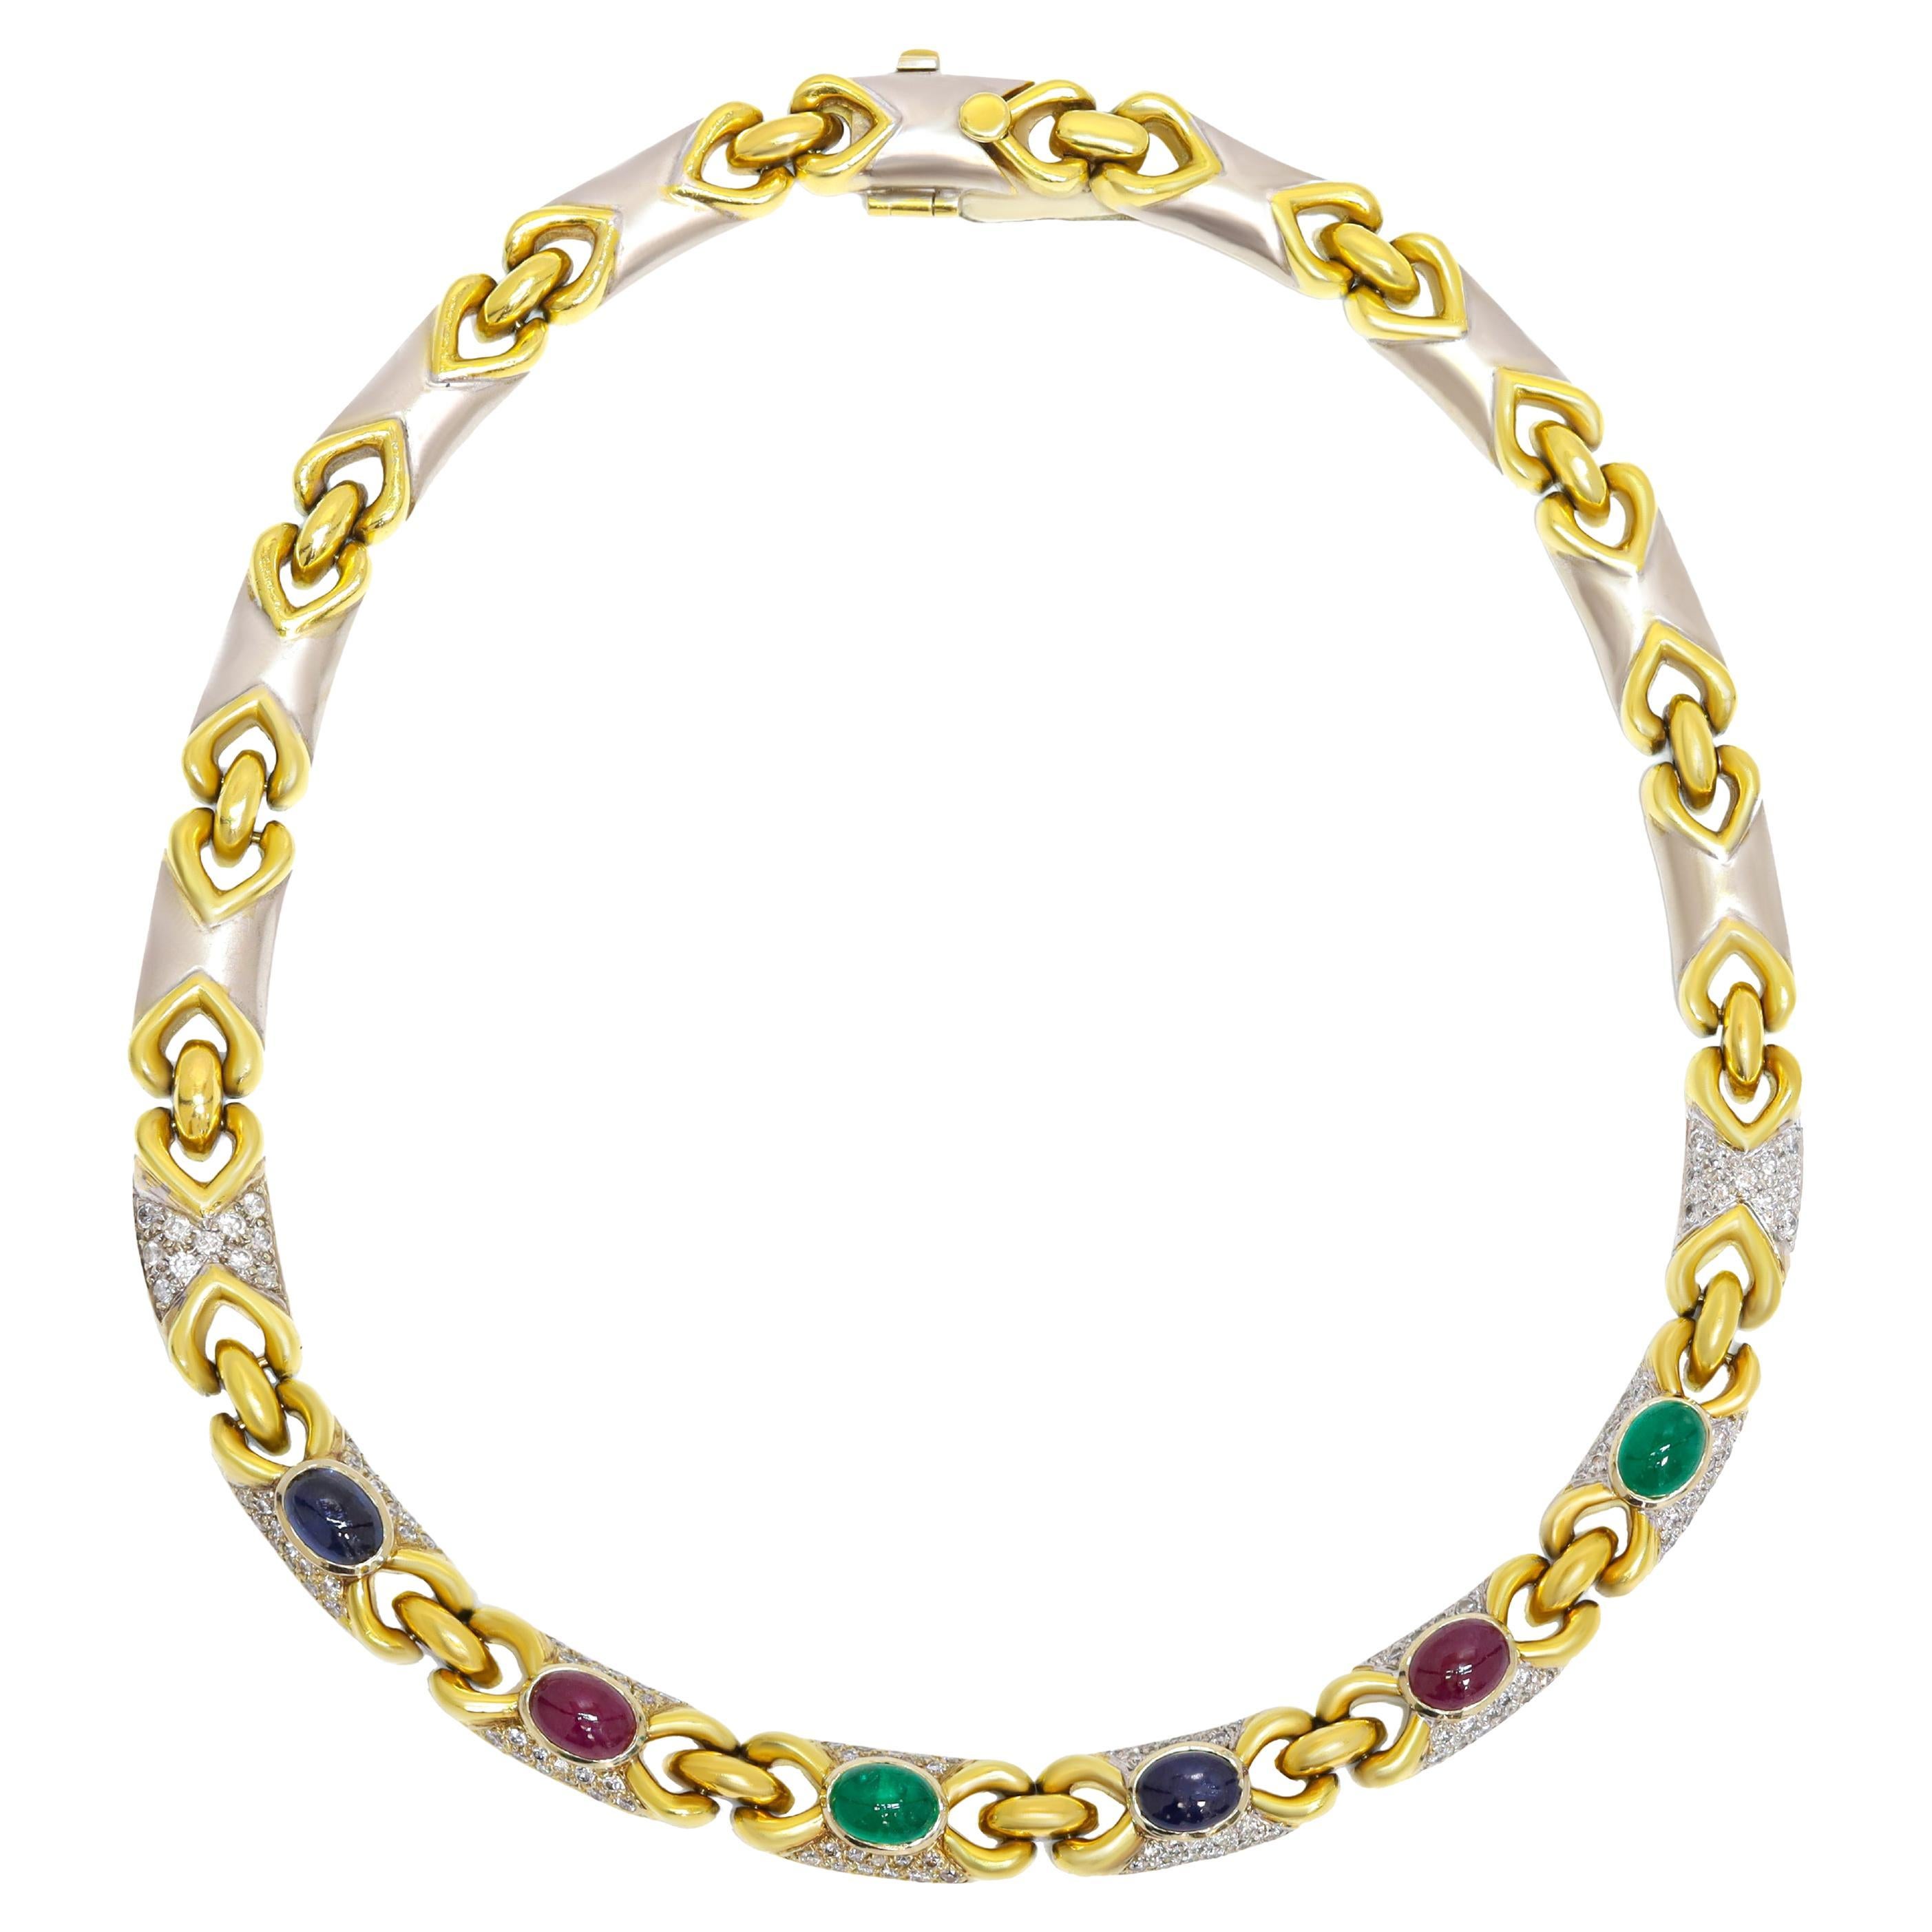 Diana M. 18kt necklace featuring 11.00cts of diamonds and 12.00 cts of cabochons For Sale